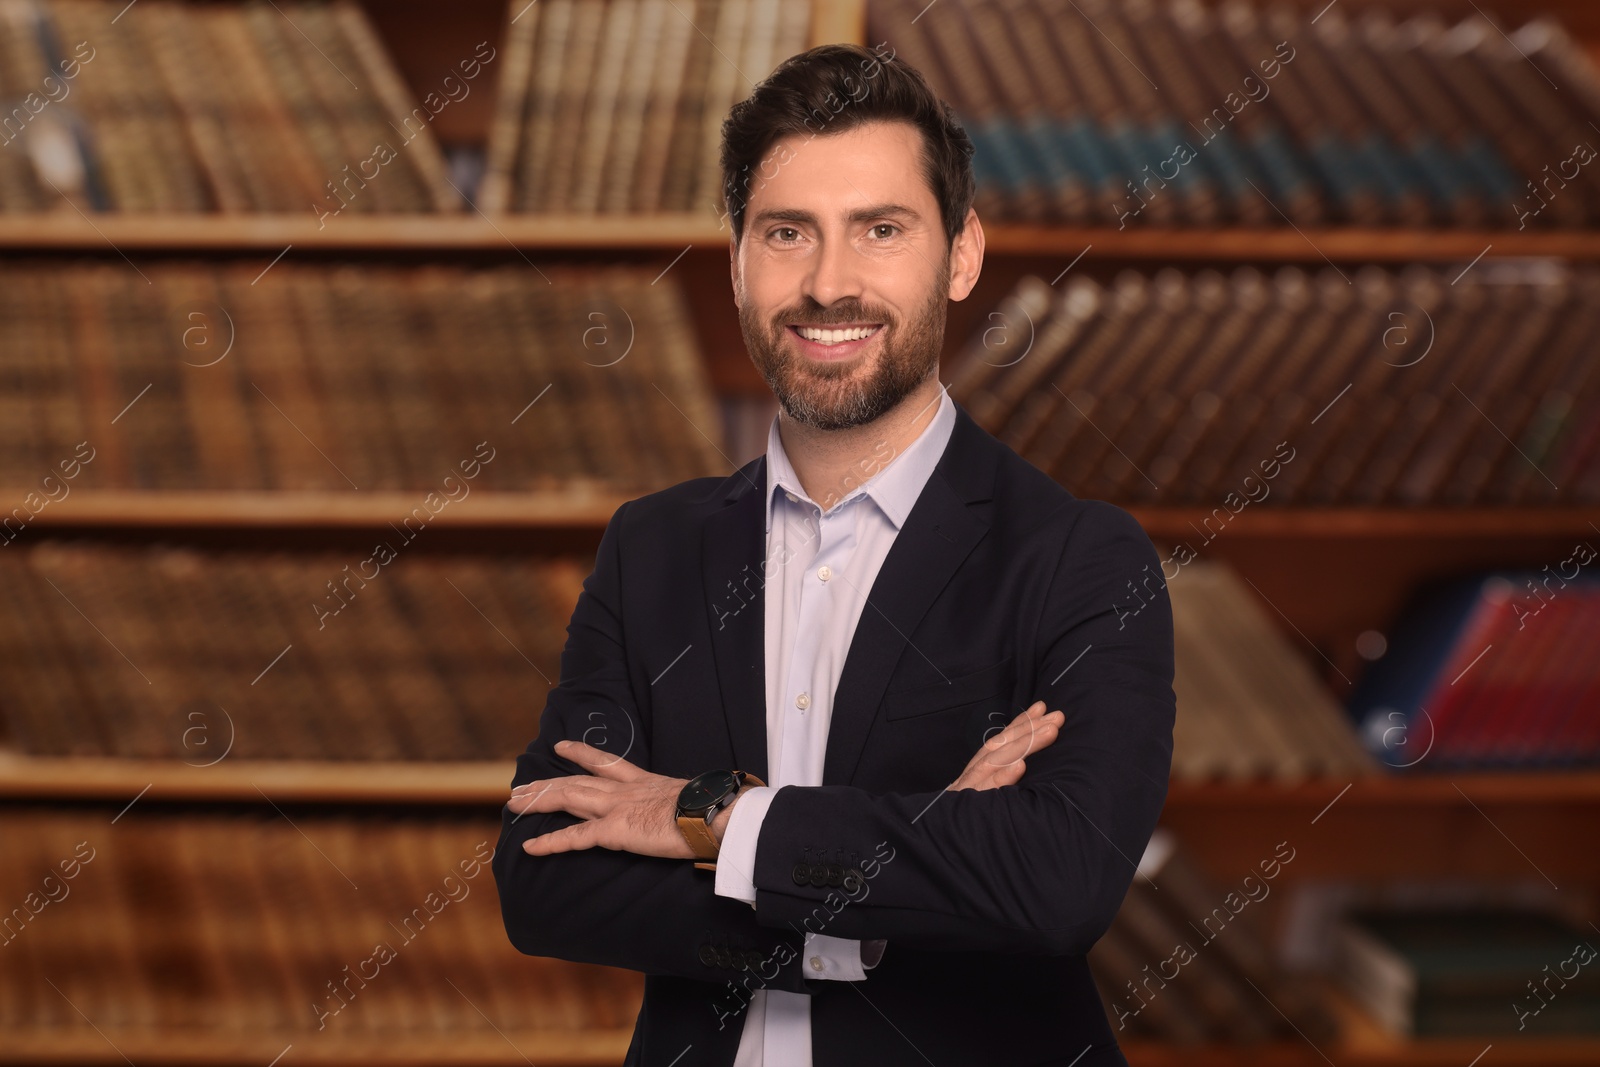 Image of Successful lawyer smiling against shelves with books